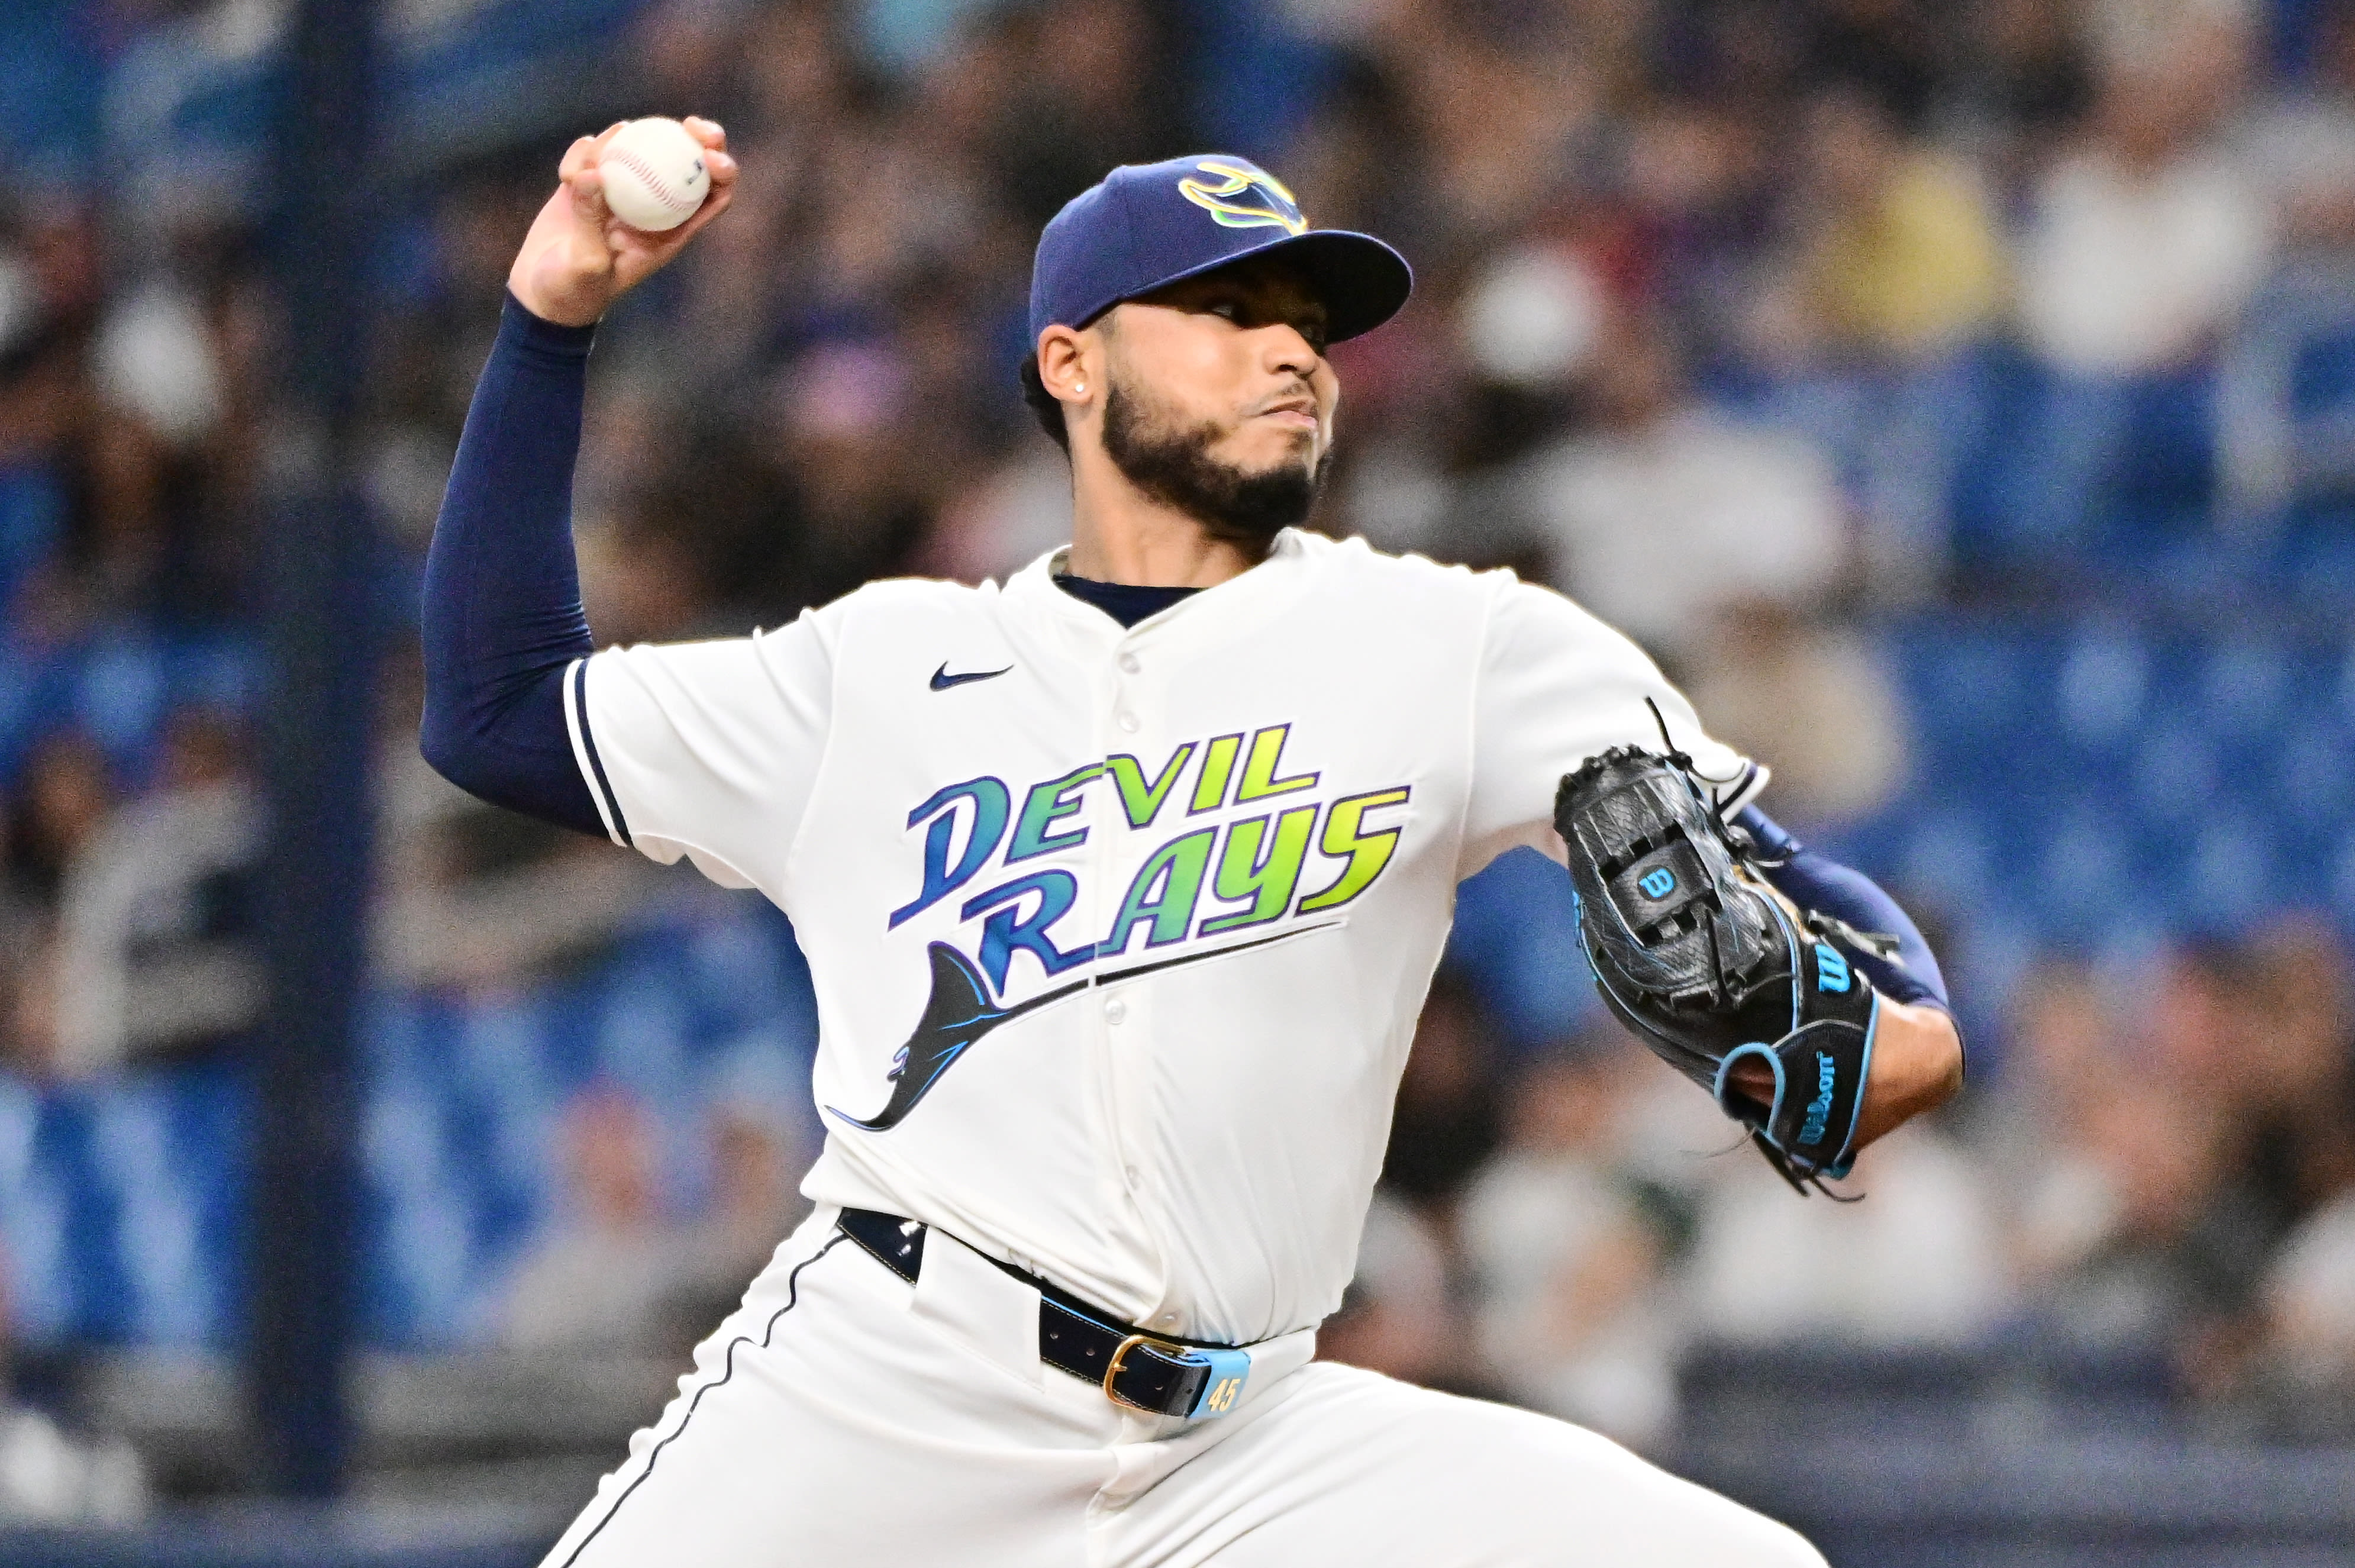 Fantasy Baseball 2-start pitcher rankings: It's a big week for those going twice